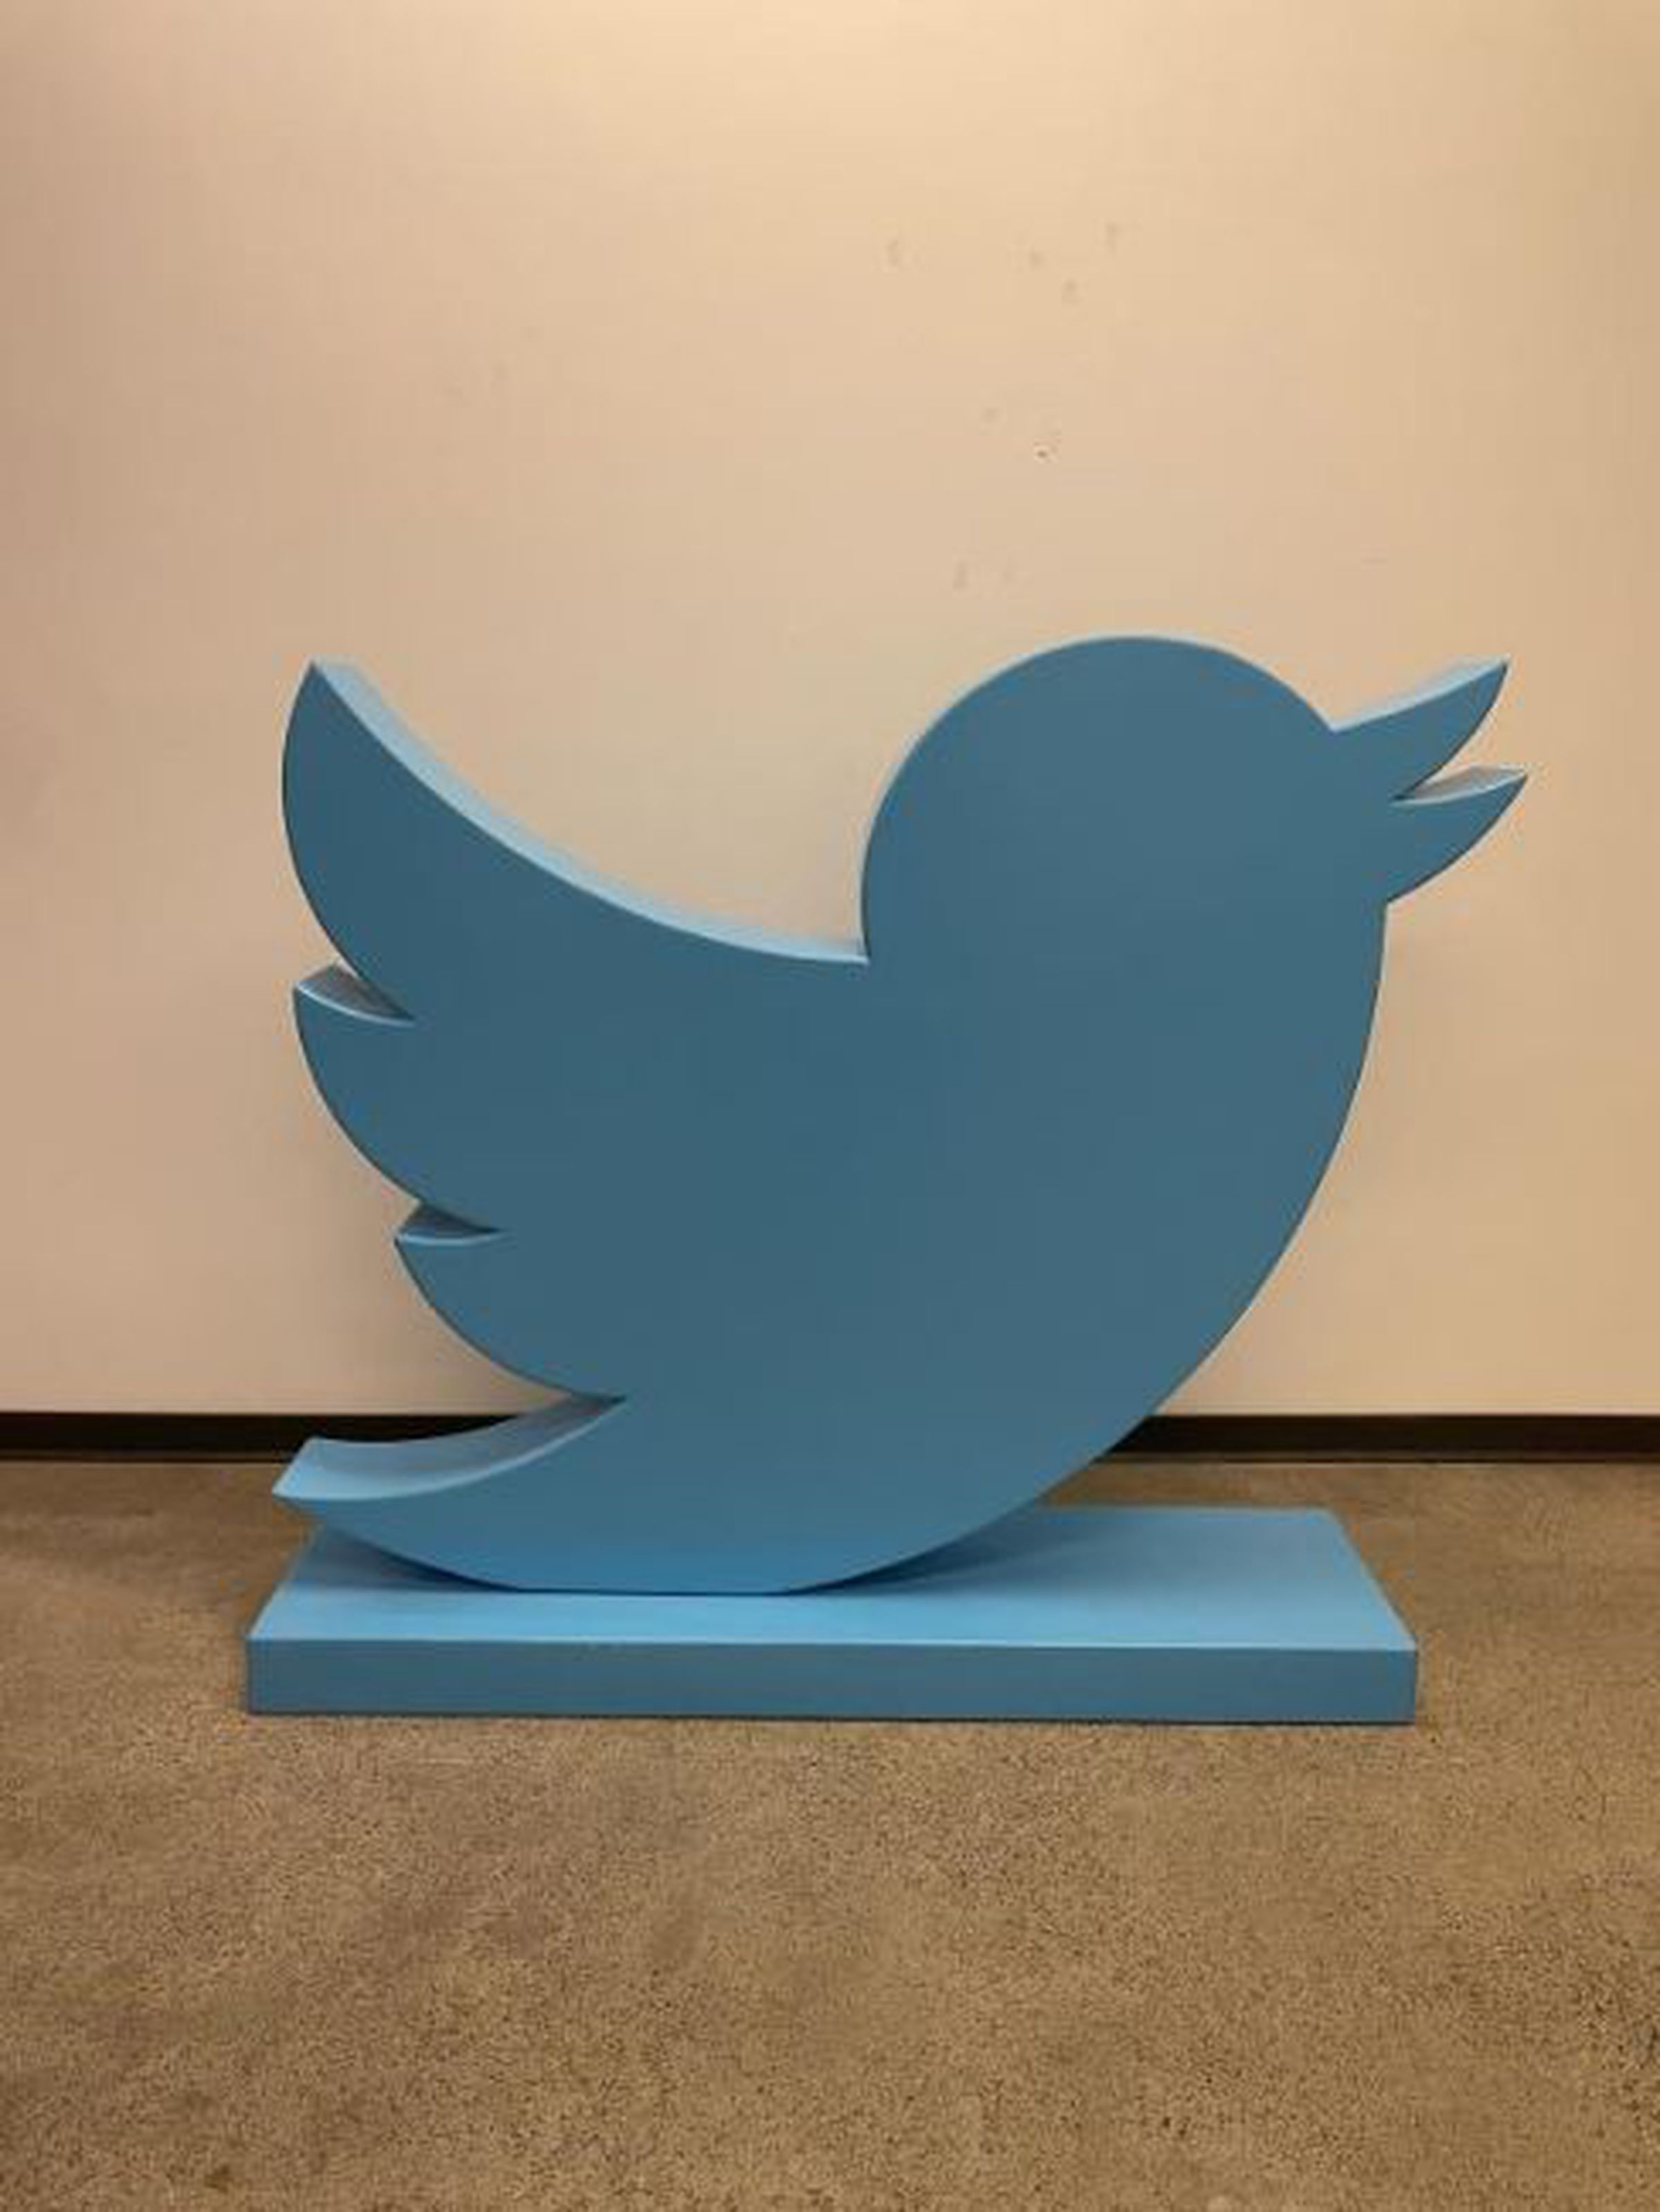 A large blue statue of the Twitter bird logo